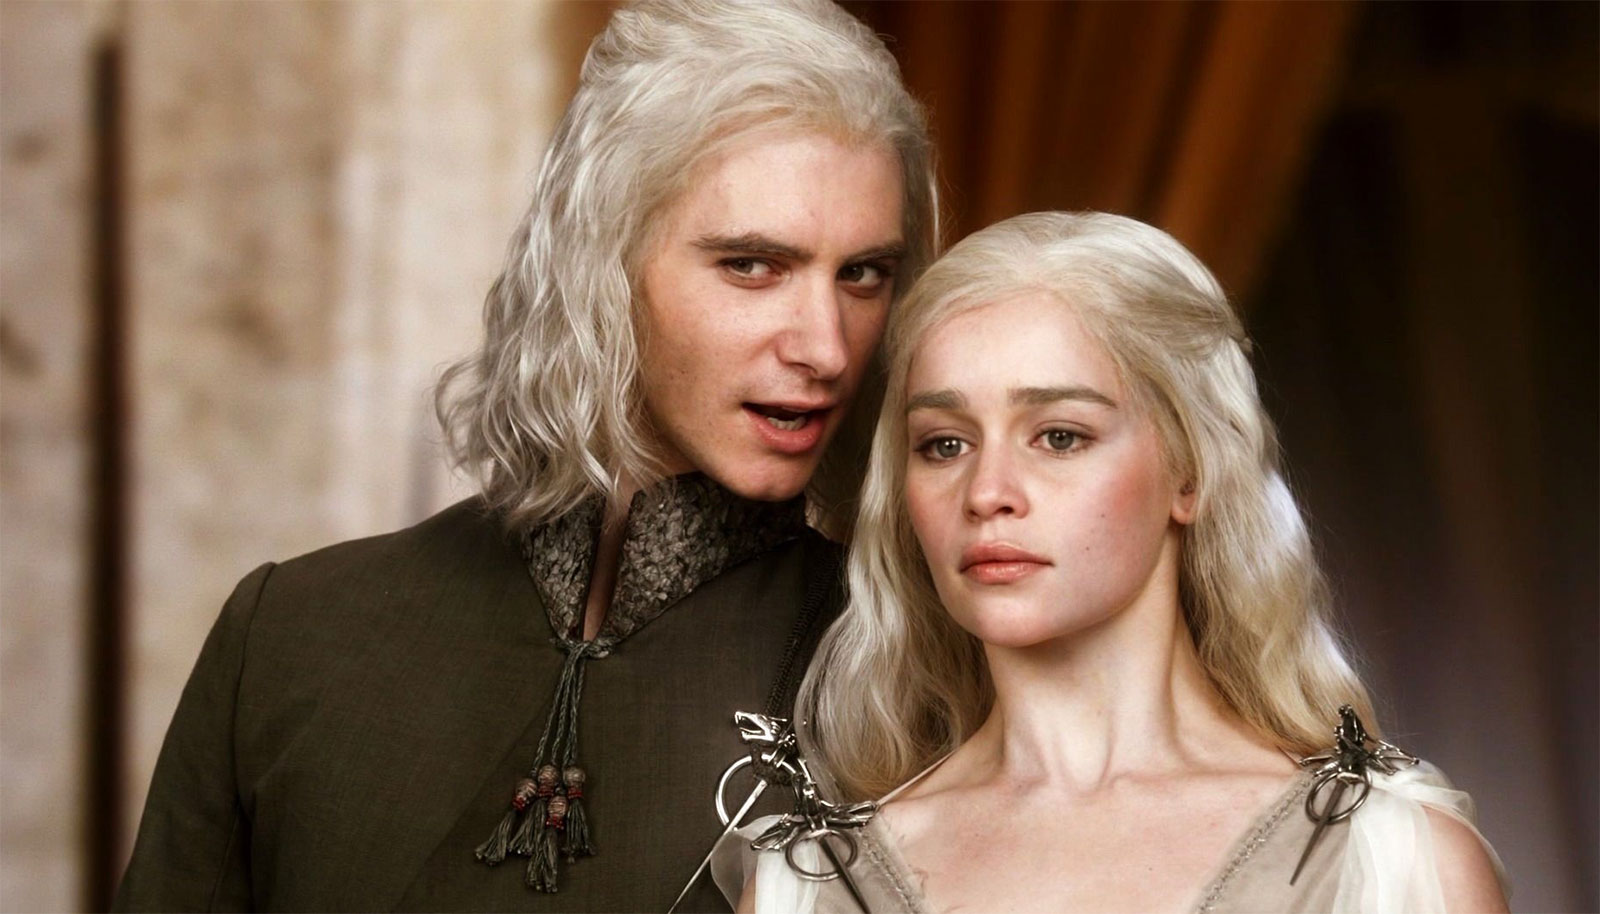 This “Game of Thrones” Quiz Will Reveal If You Can Actually Win the Iron Throne Daenerys Targaryen